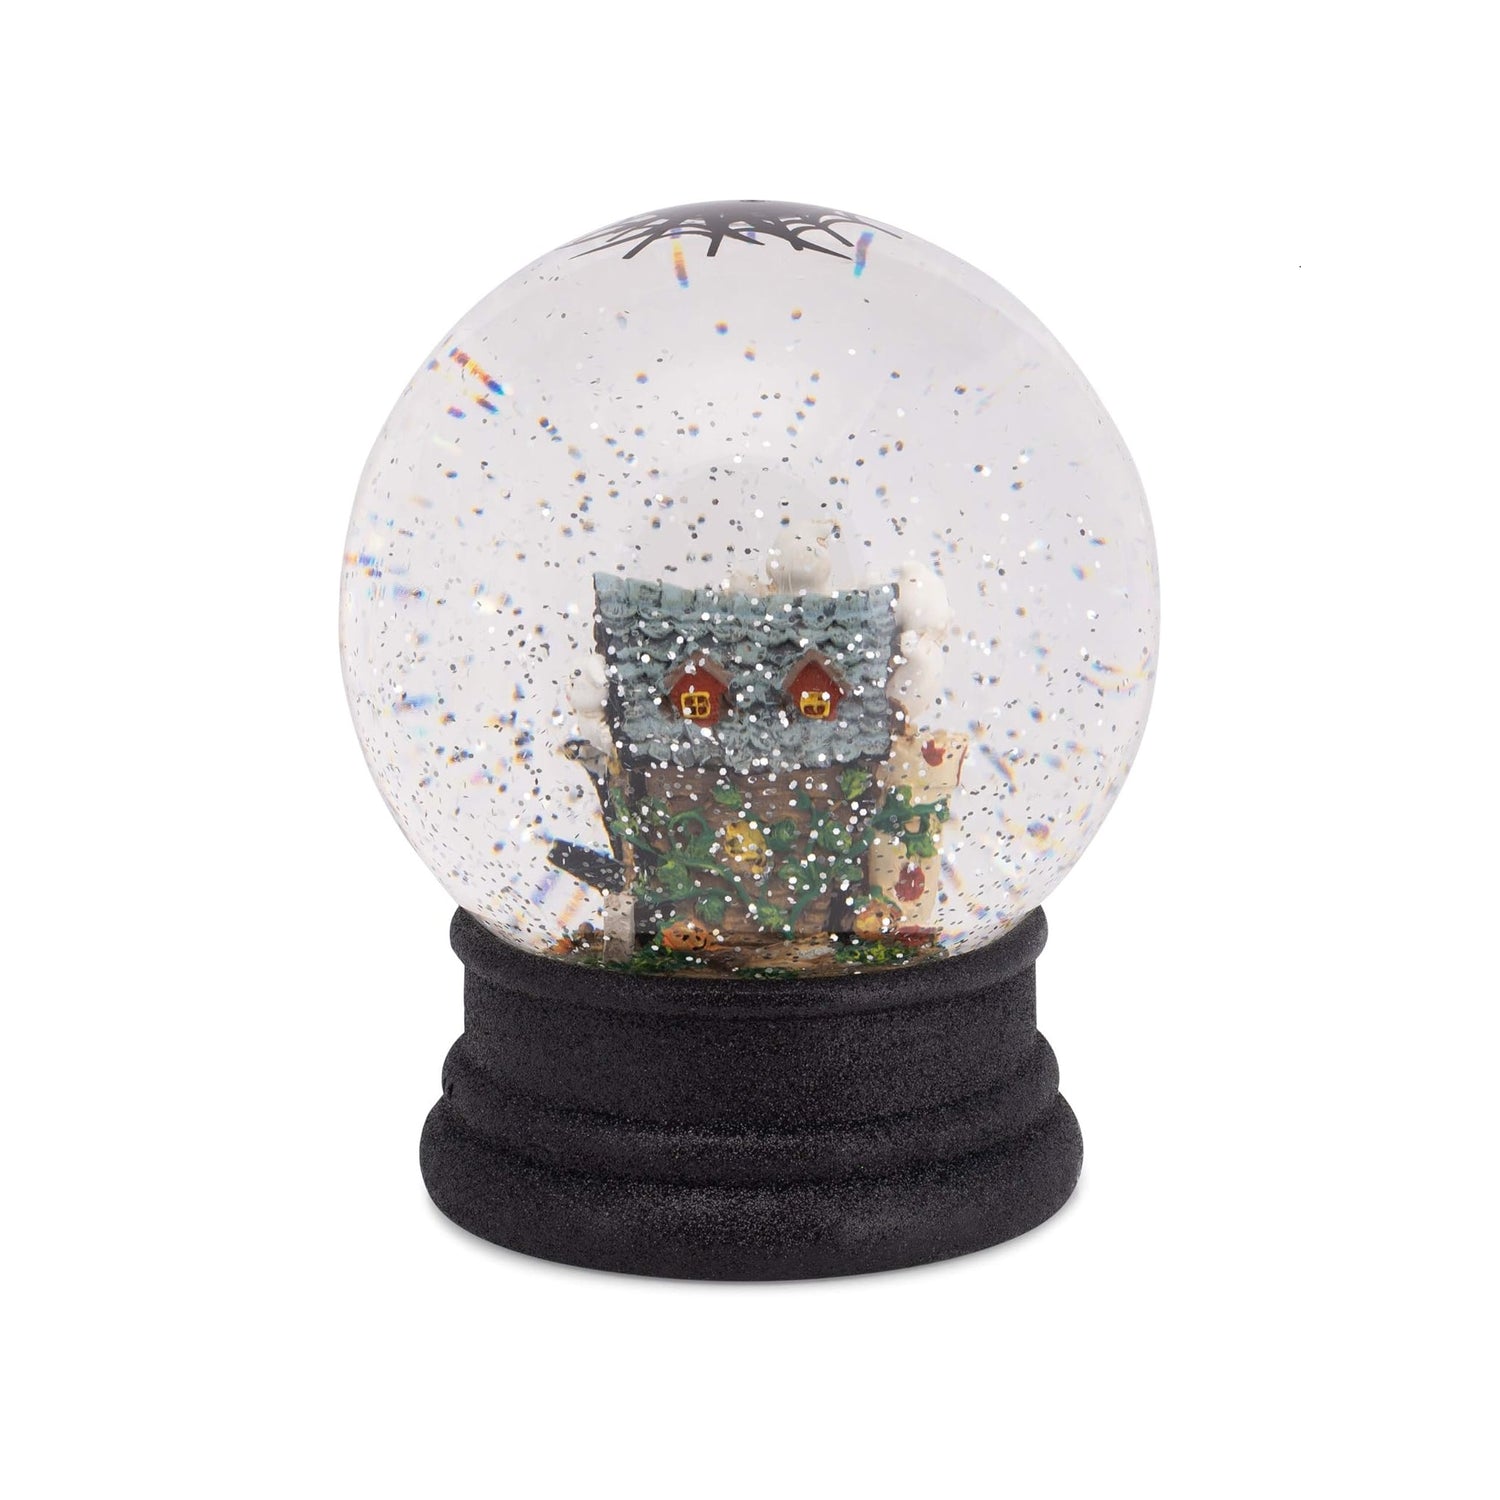 Roman LED Lighted Ghost in House Swirl Dome with Spooky Giggle